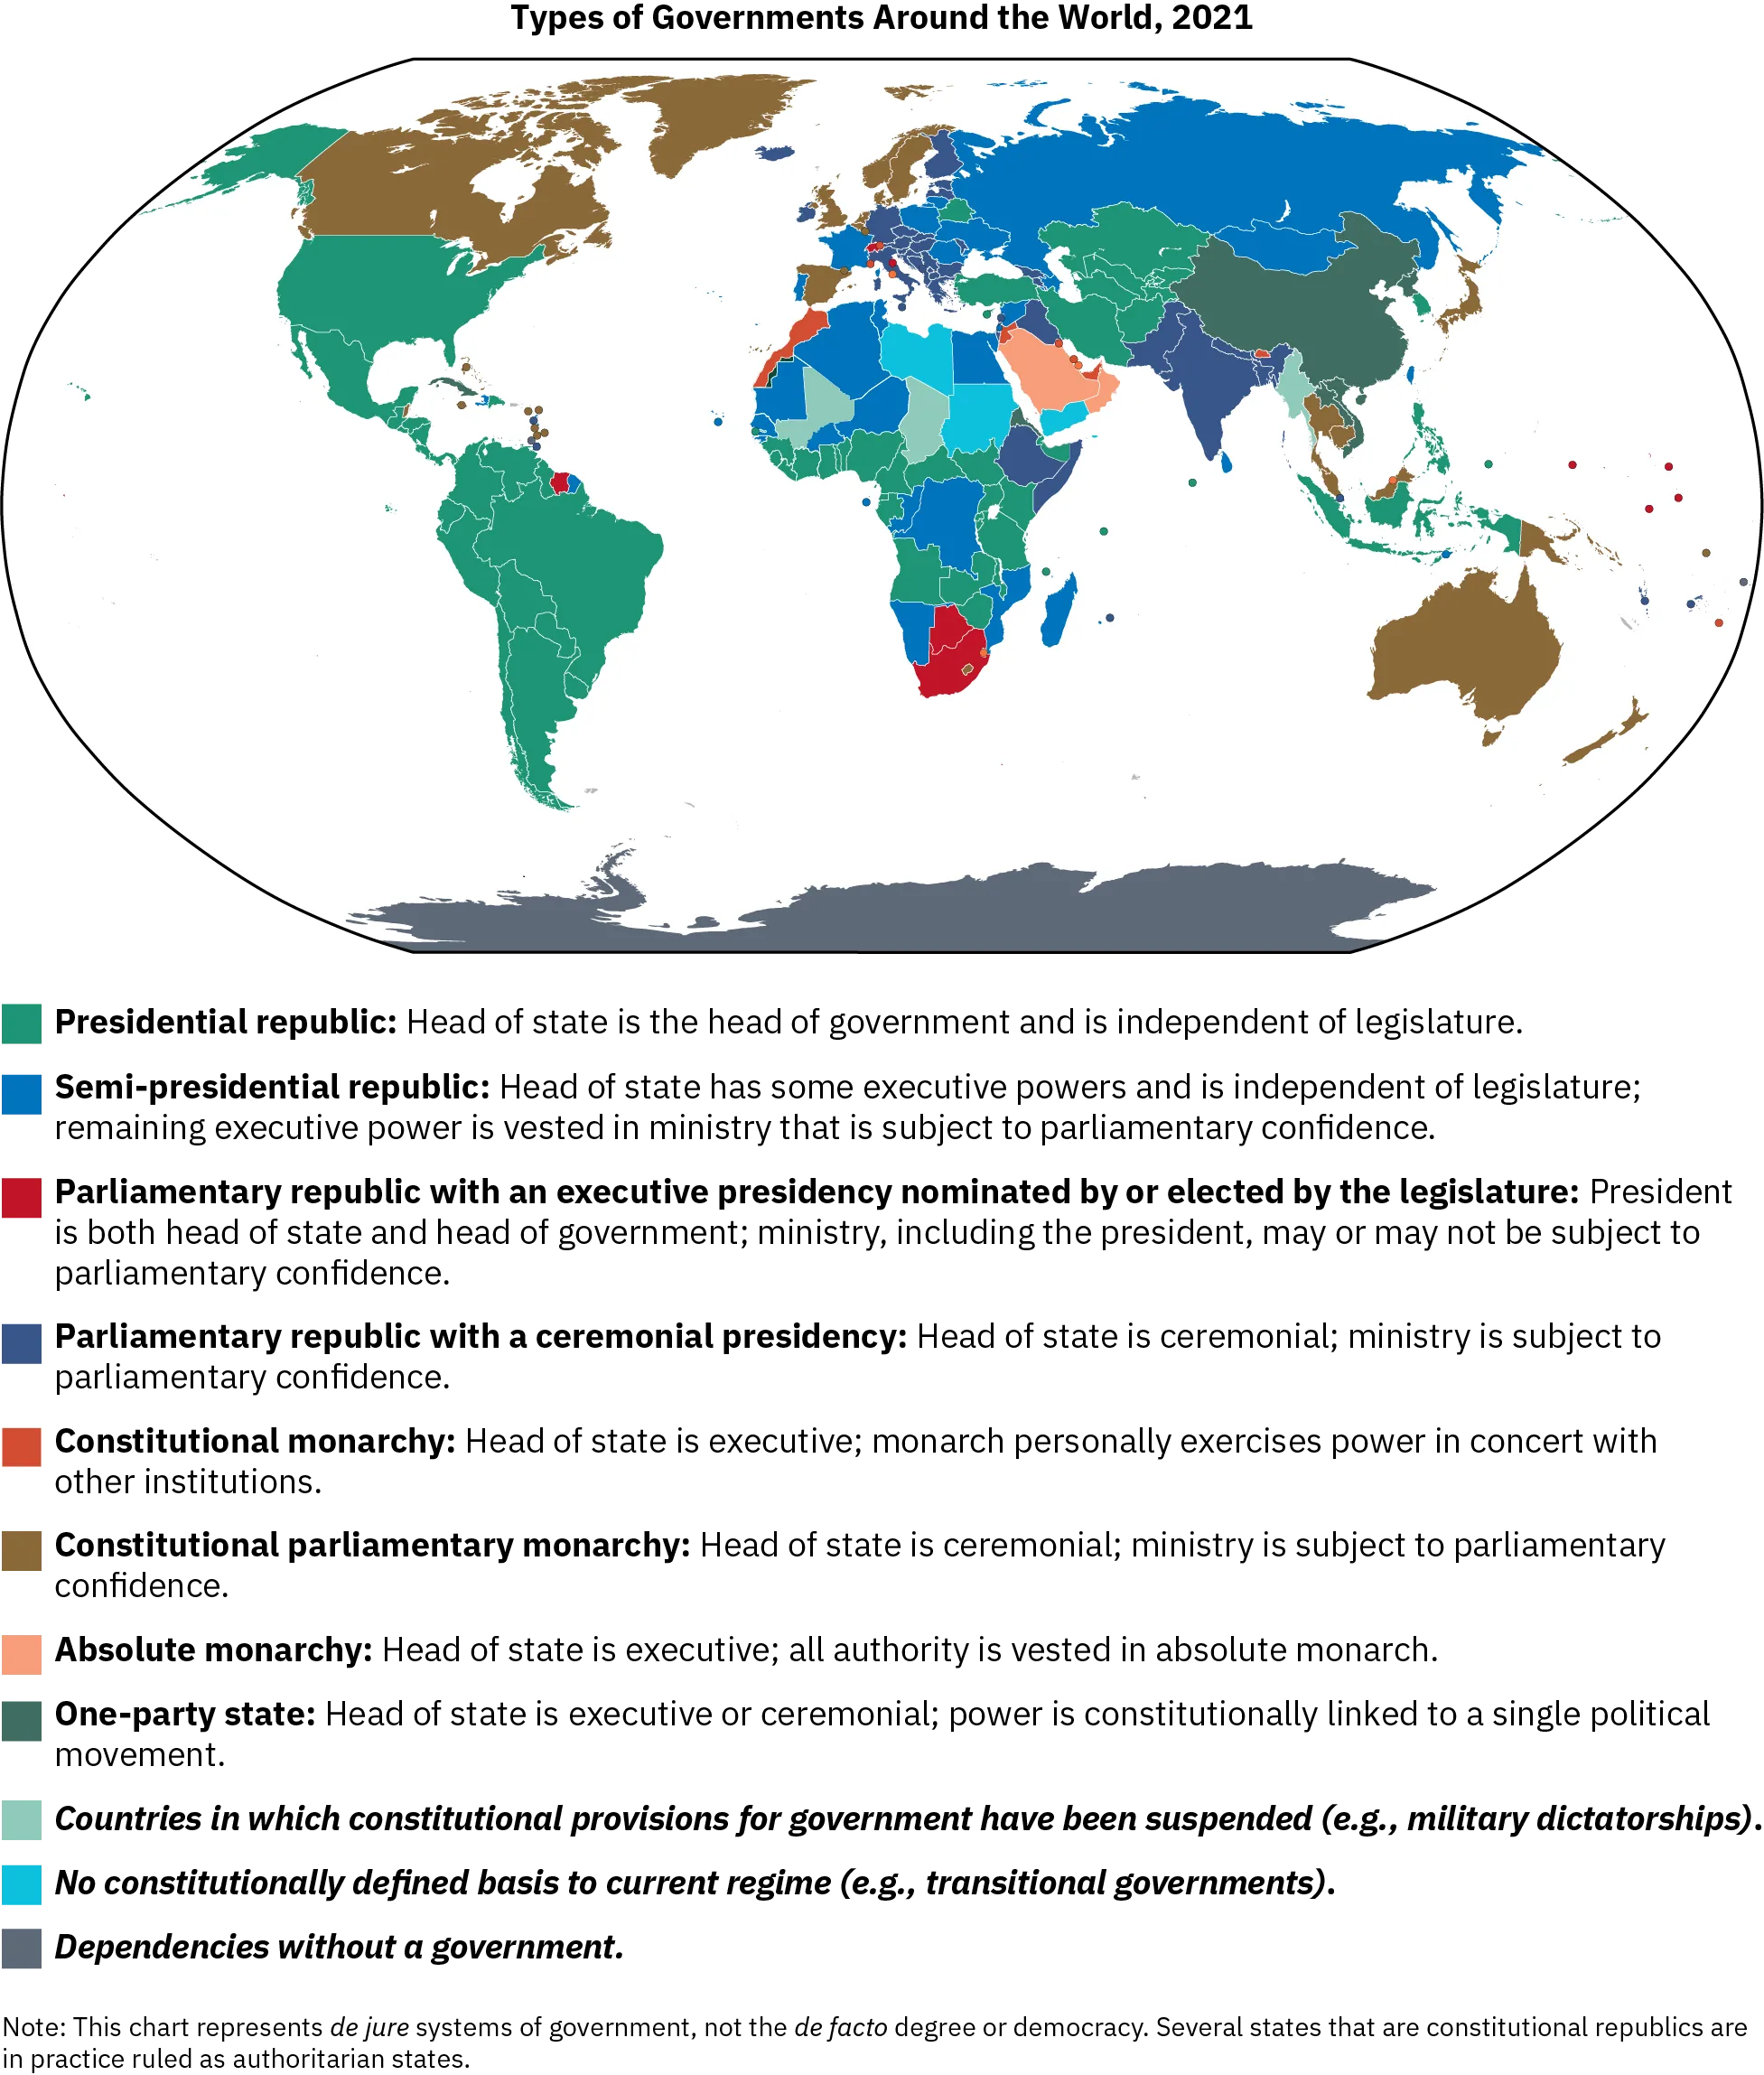 A world map codes countries by form of government: presidential republic, semi-presidential republic, parliamentary republic, constitutional monarchy, absolute monarchy, and others. Most presidential republics are in the Americas, Africa, and the Middle East. Most semi-presidential republics are in Europe and Africa, and most parliamentary republics are in Europe and Asia.